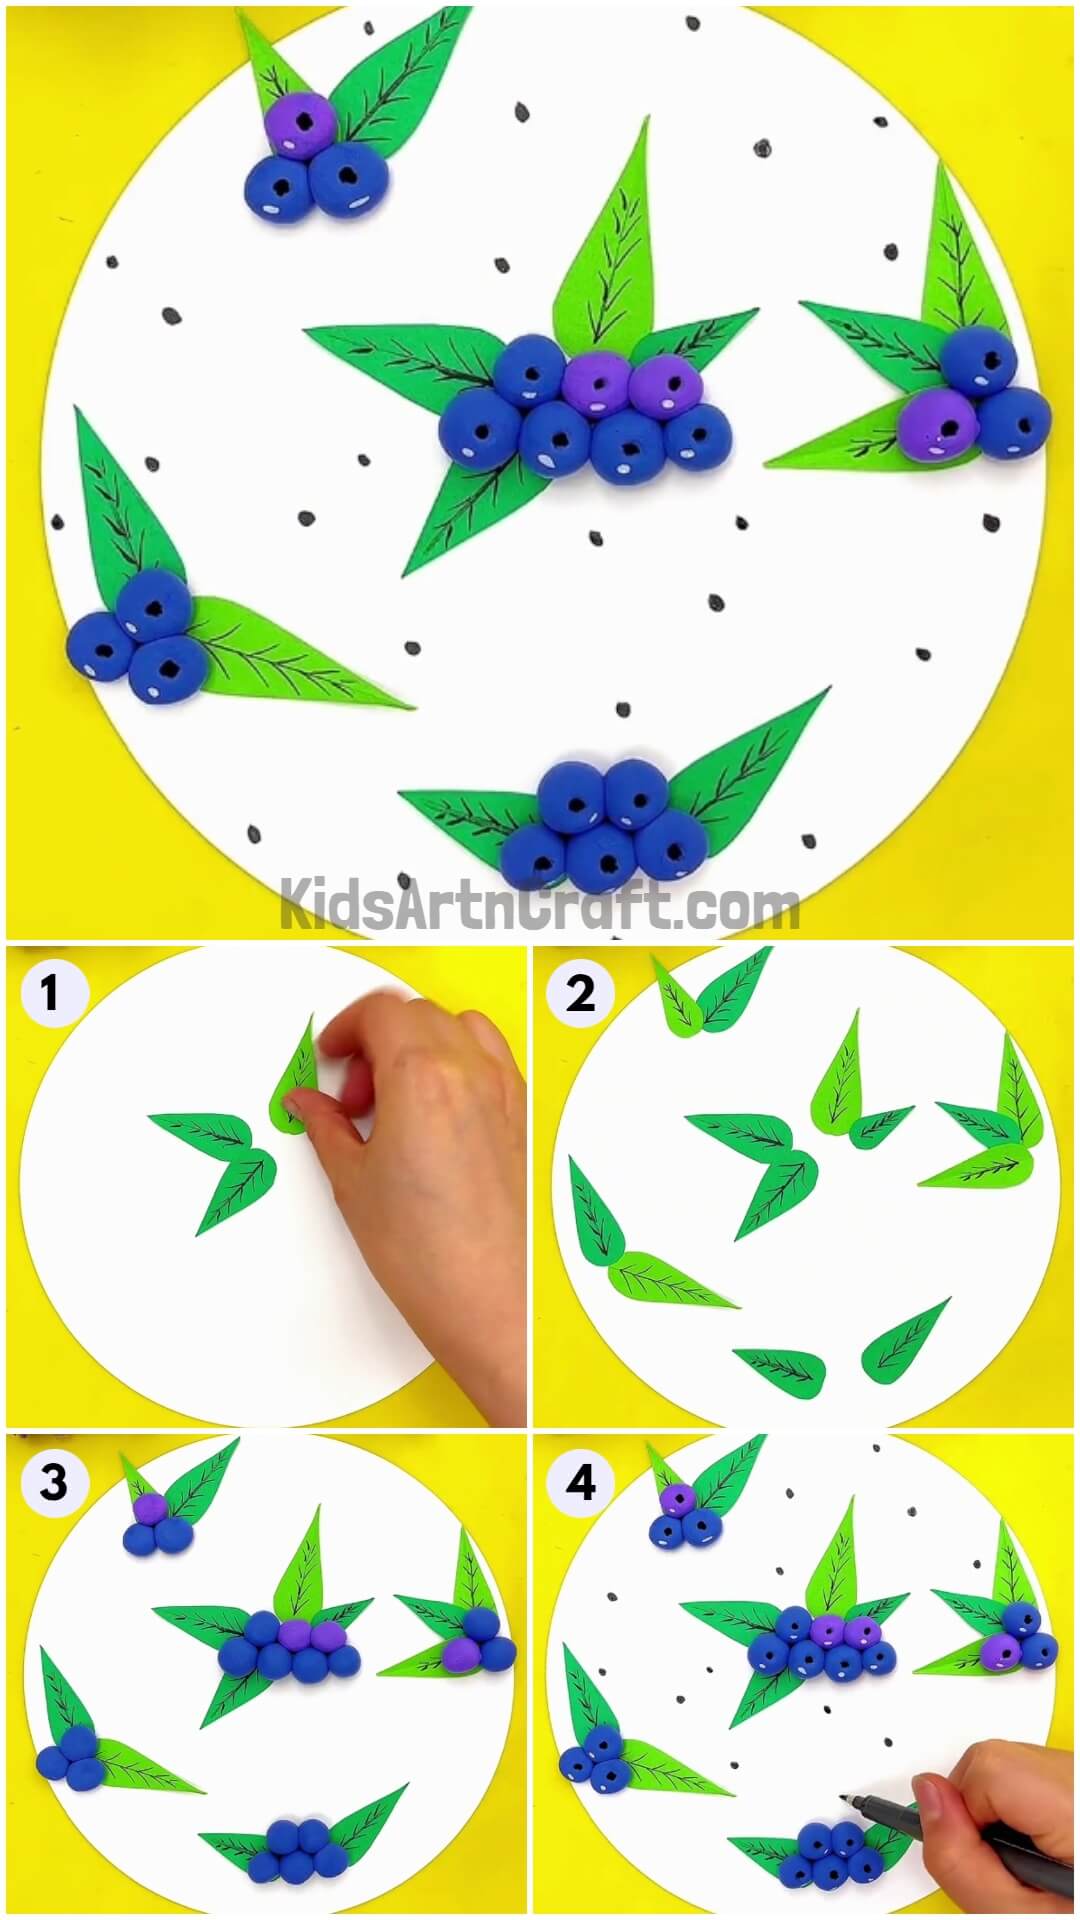 Blueberry Clay Craft Step-by-step Tutorial For Beginners